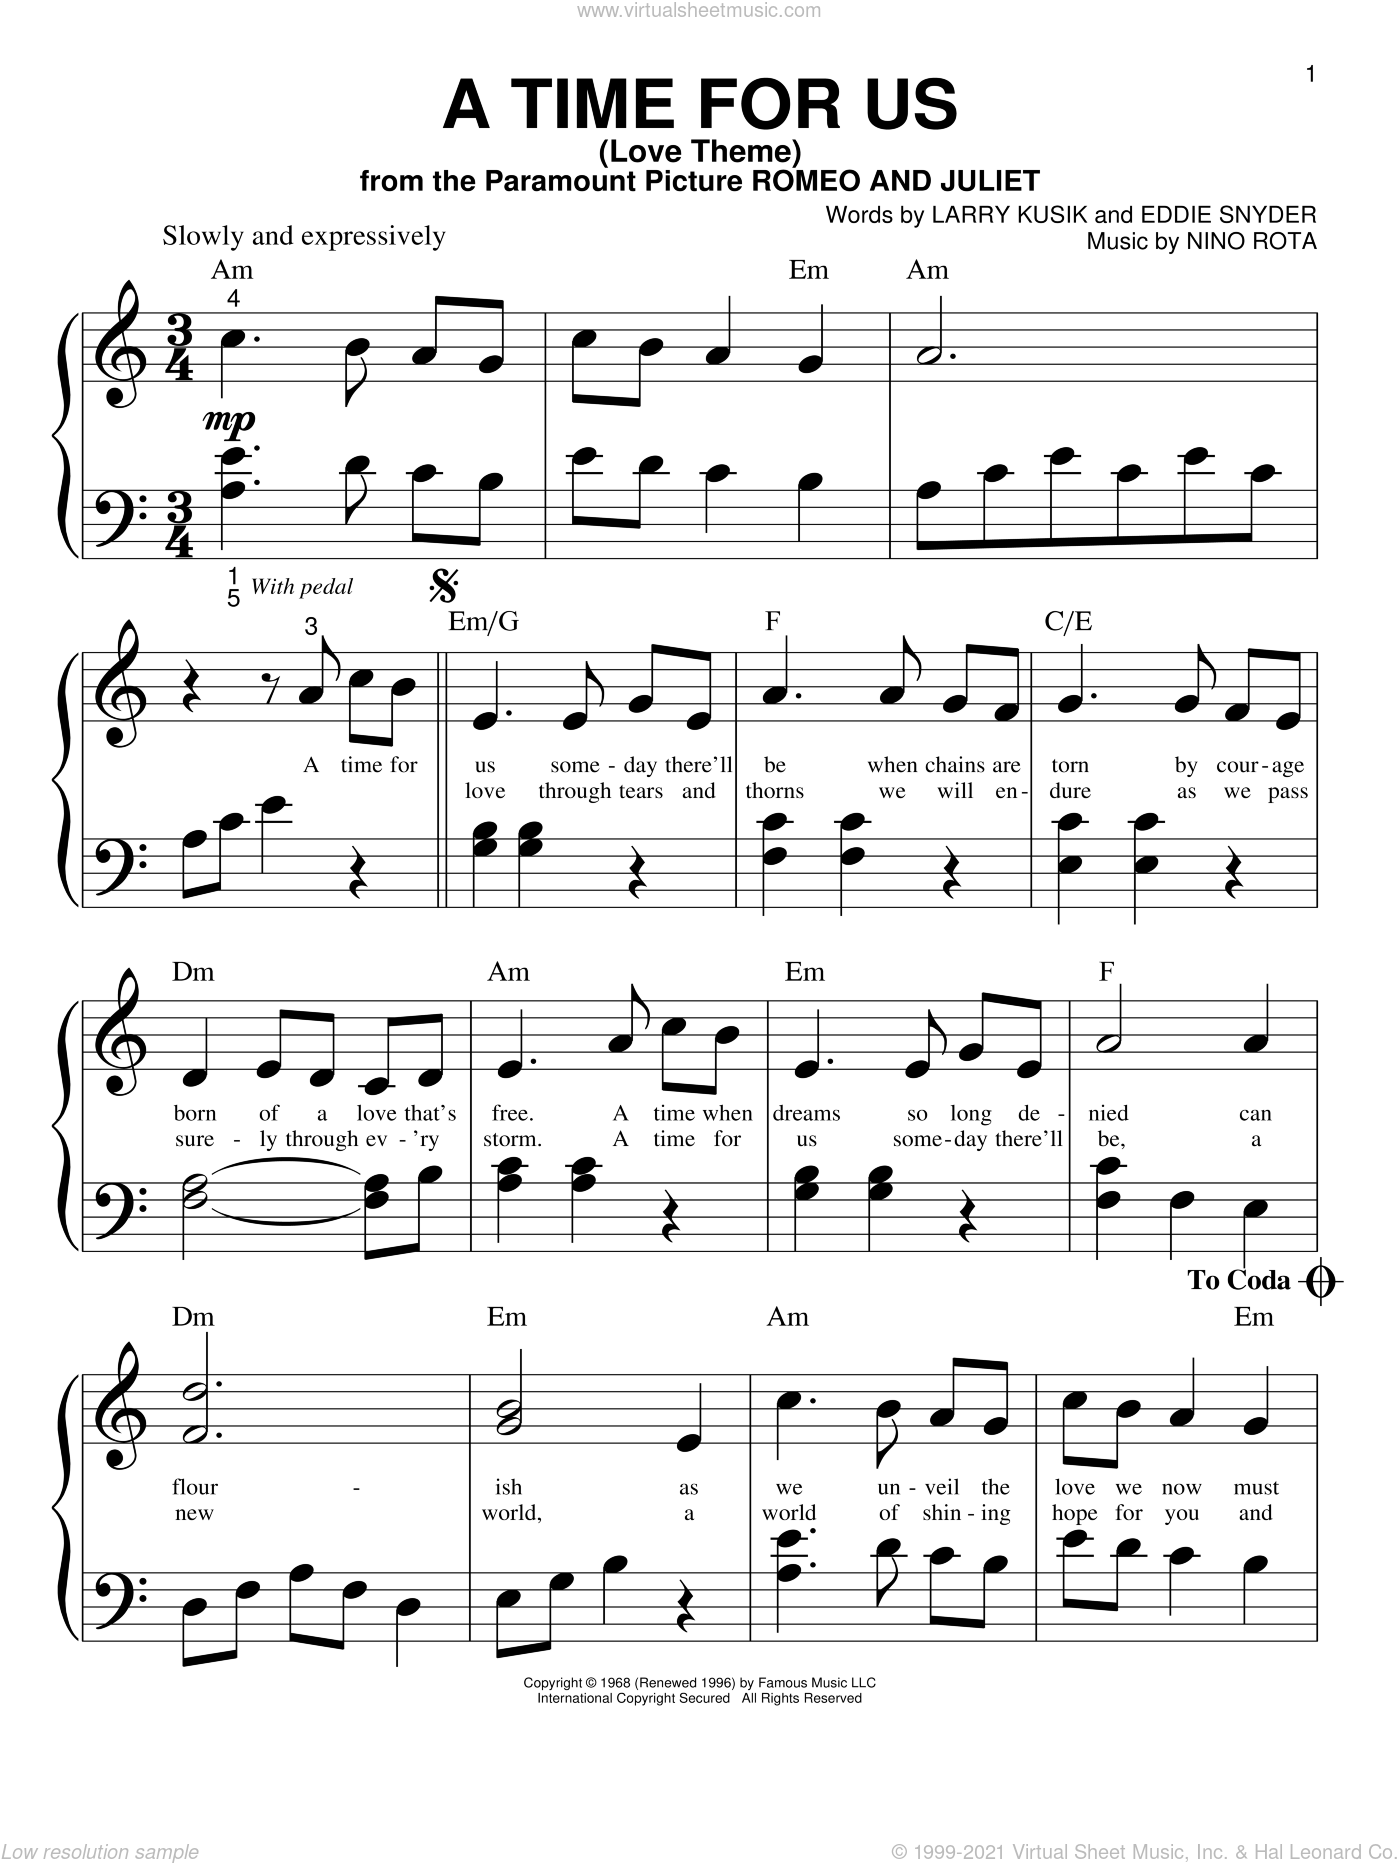 Rota - A Time For Us (Love Theme) sheet music for piano solo (big note